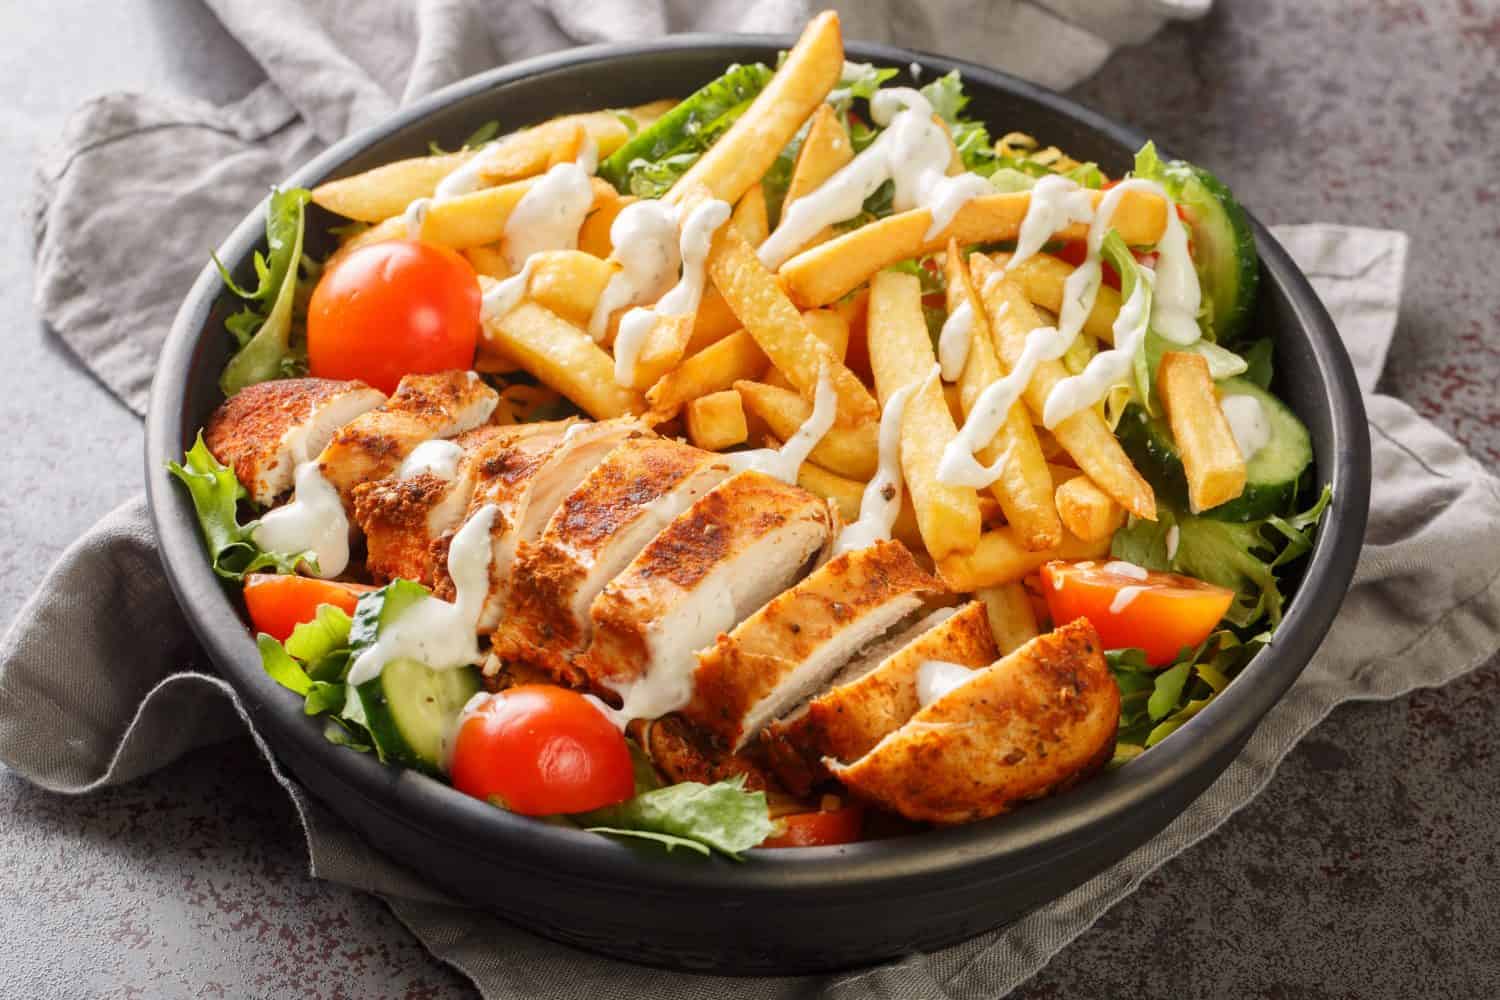 Pittsburgh steak salad consists of a bed of lettuce that's topped with tomatoes, cucumbers, a piece of grilled chicken, and crispy french fries closeup on the bowl on the table. Horizontal